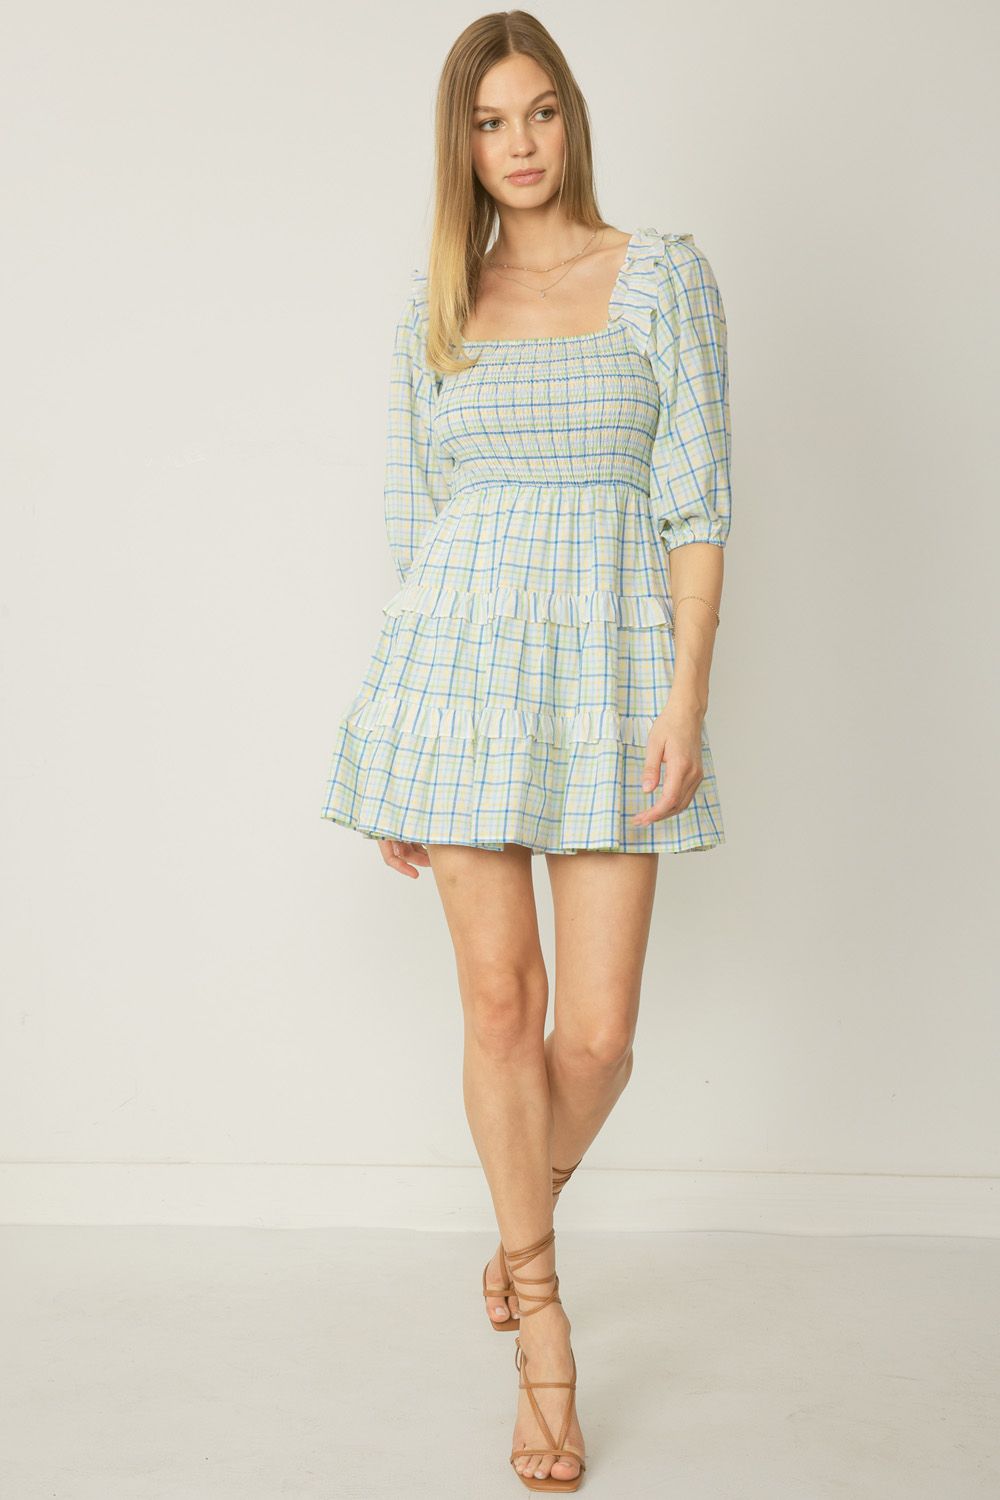 Smocked Bodice Gingham Dress-Short Dresses-Podos Boutique, a Women's Fashion Boutique Located in Calera, AL